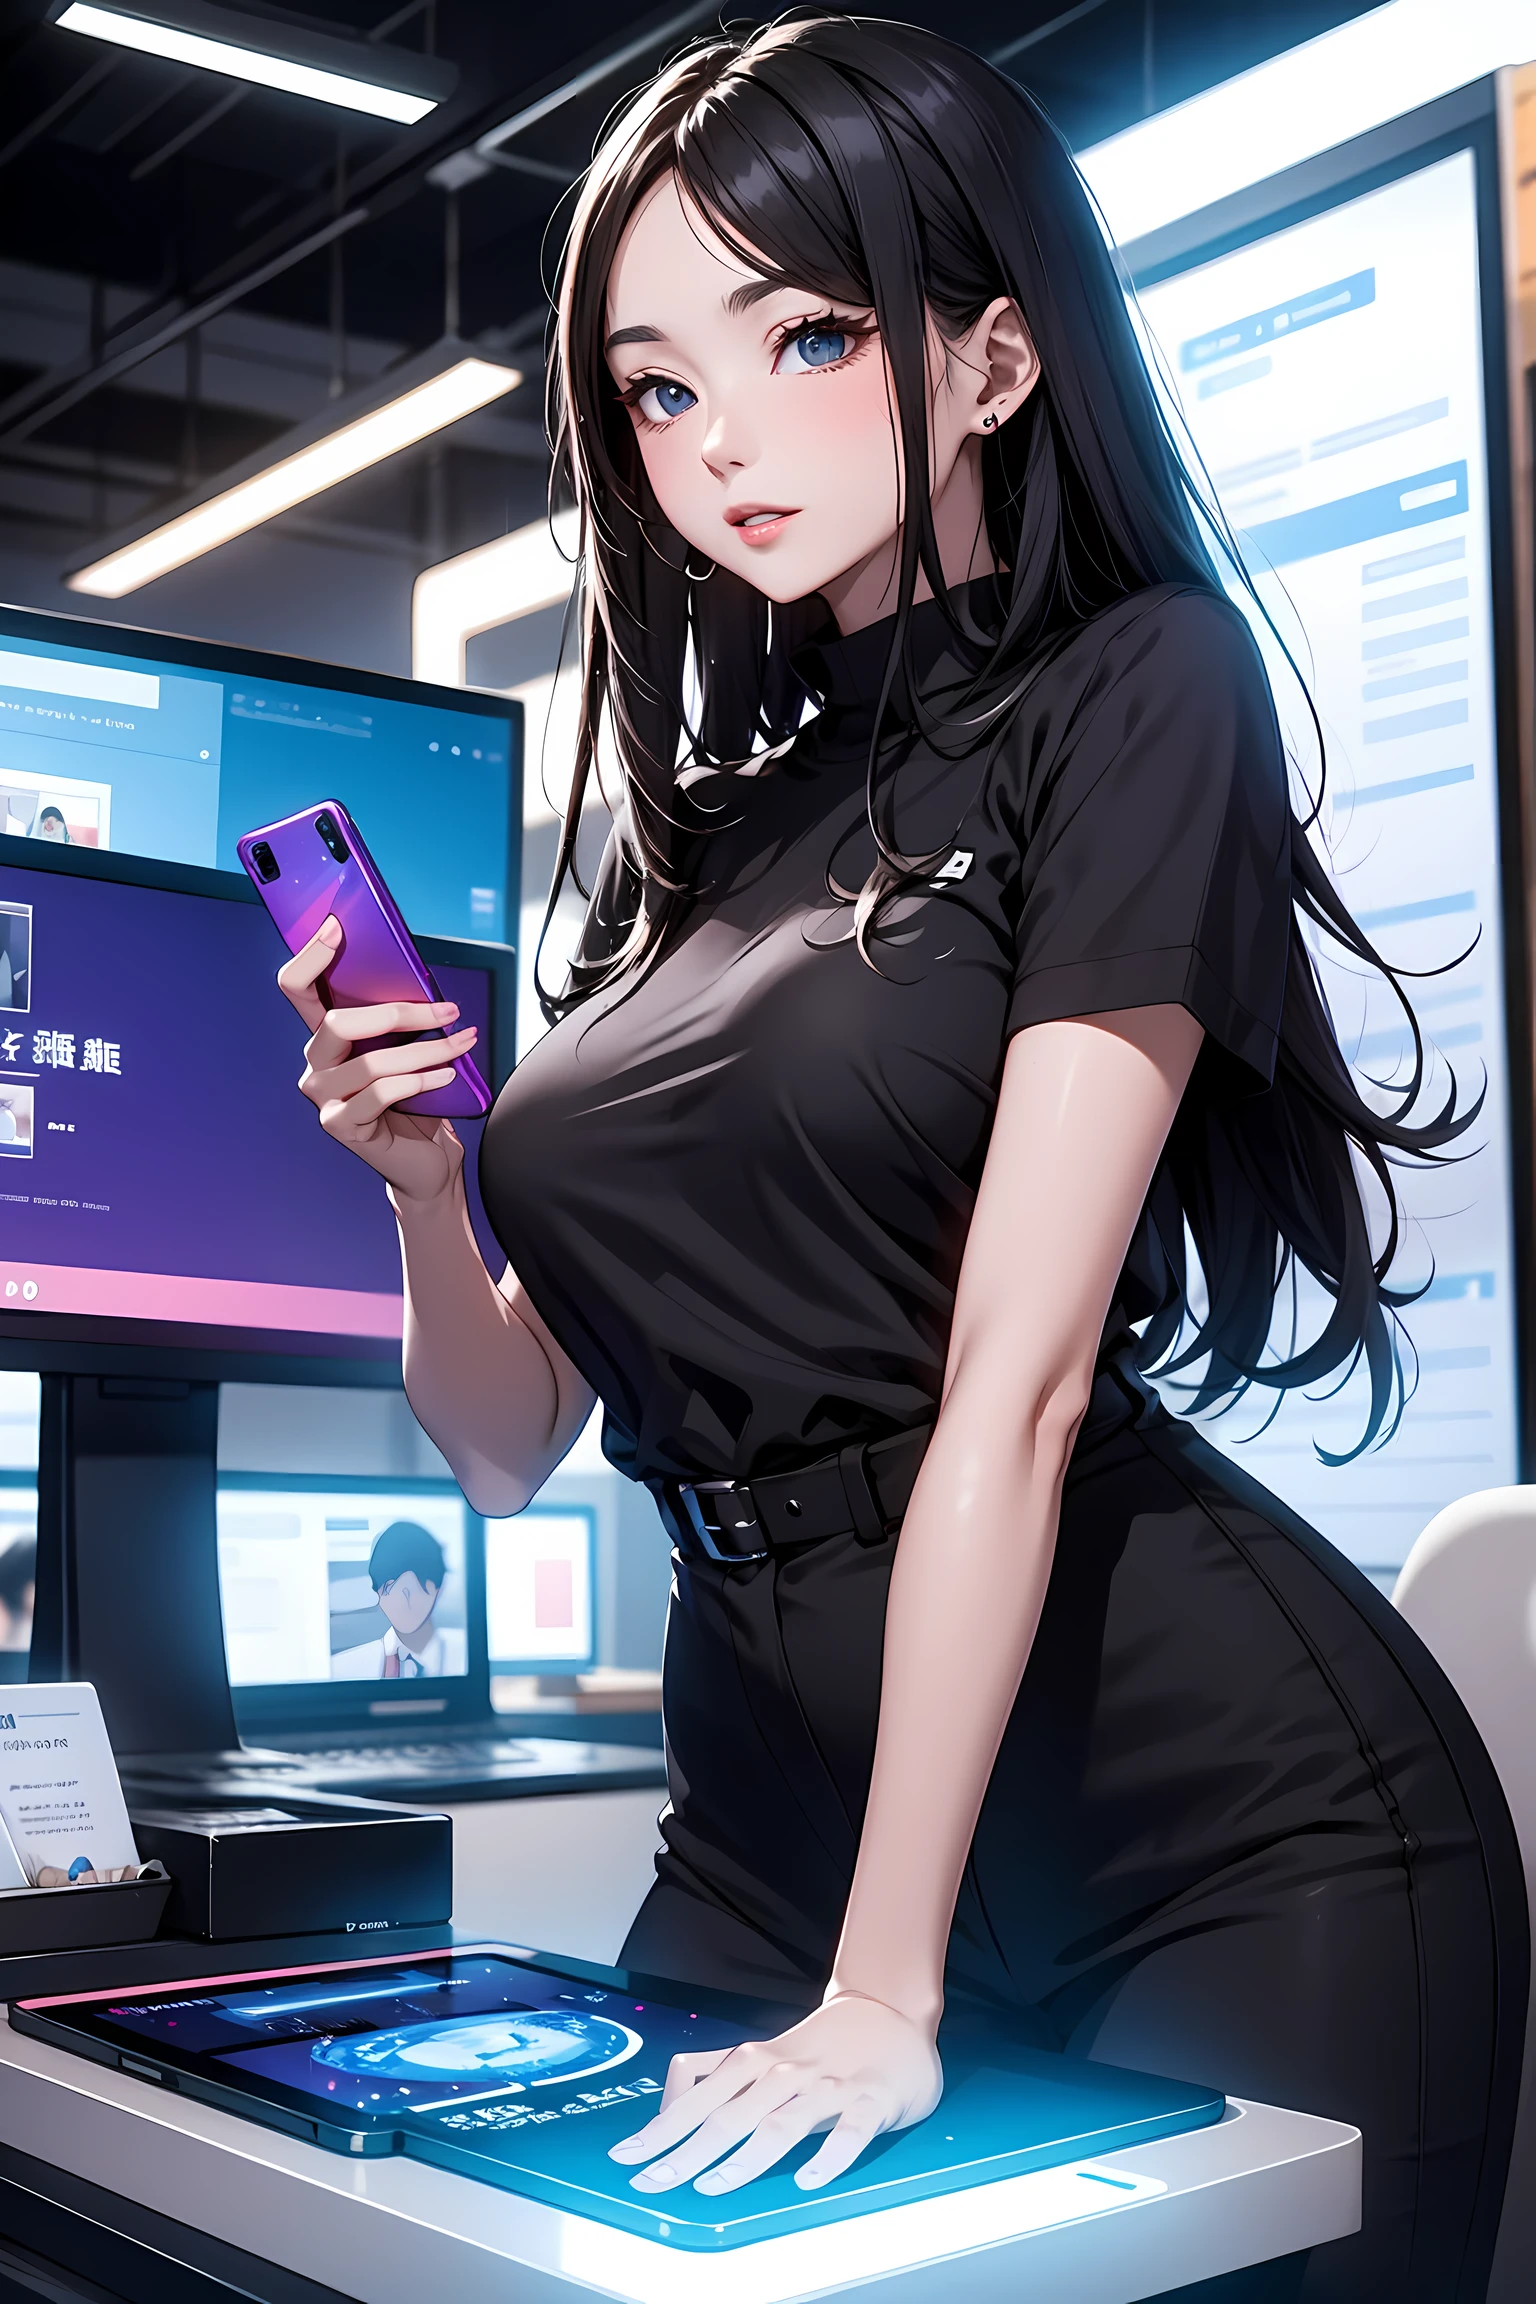 The office district of the near future、Office worker using a smartphone mounted on his arm。Beauty OL,Holograms displayed from a smartphone on your arm、